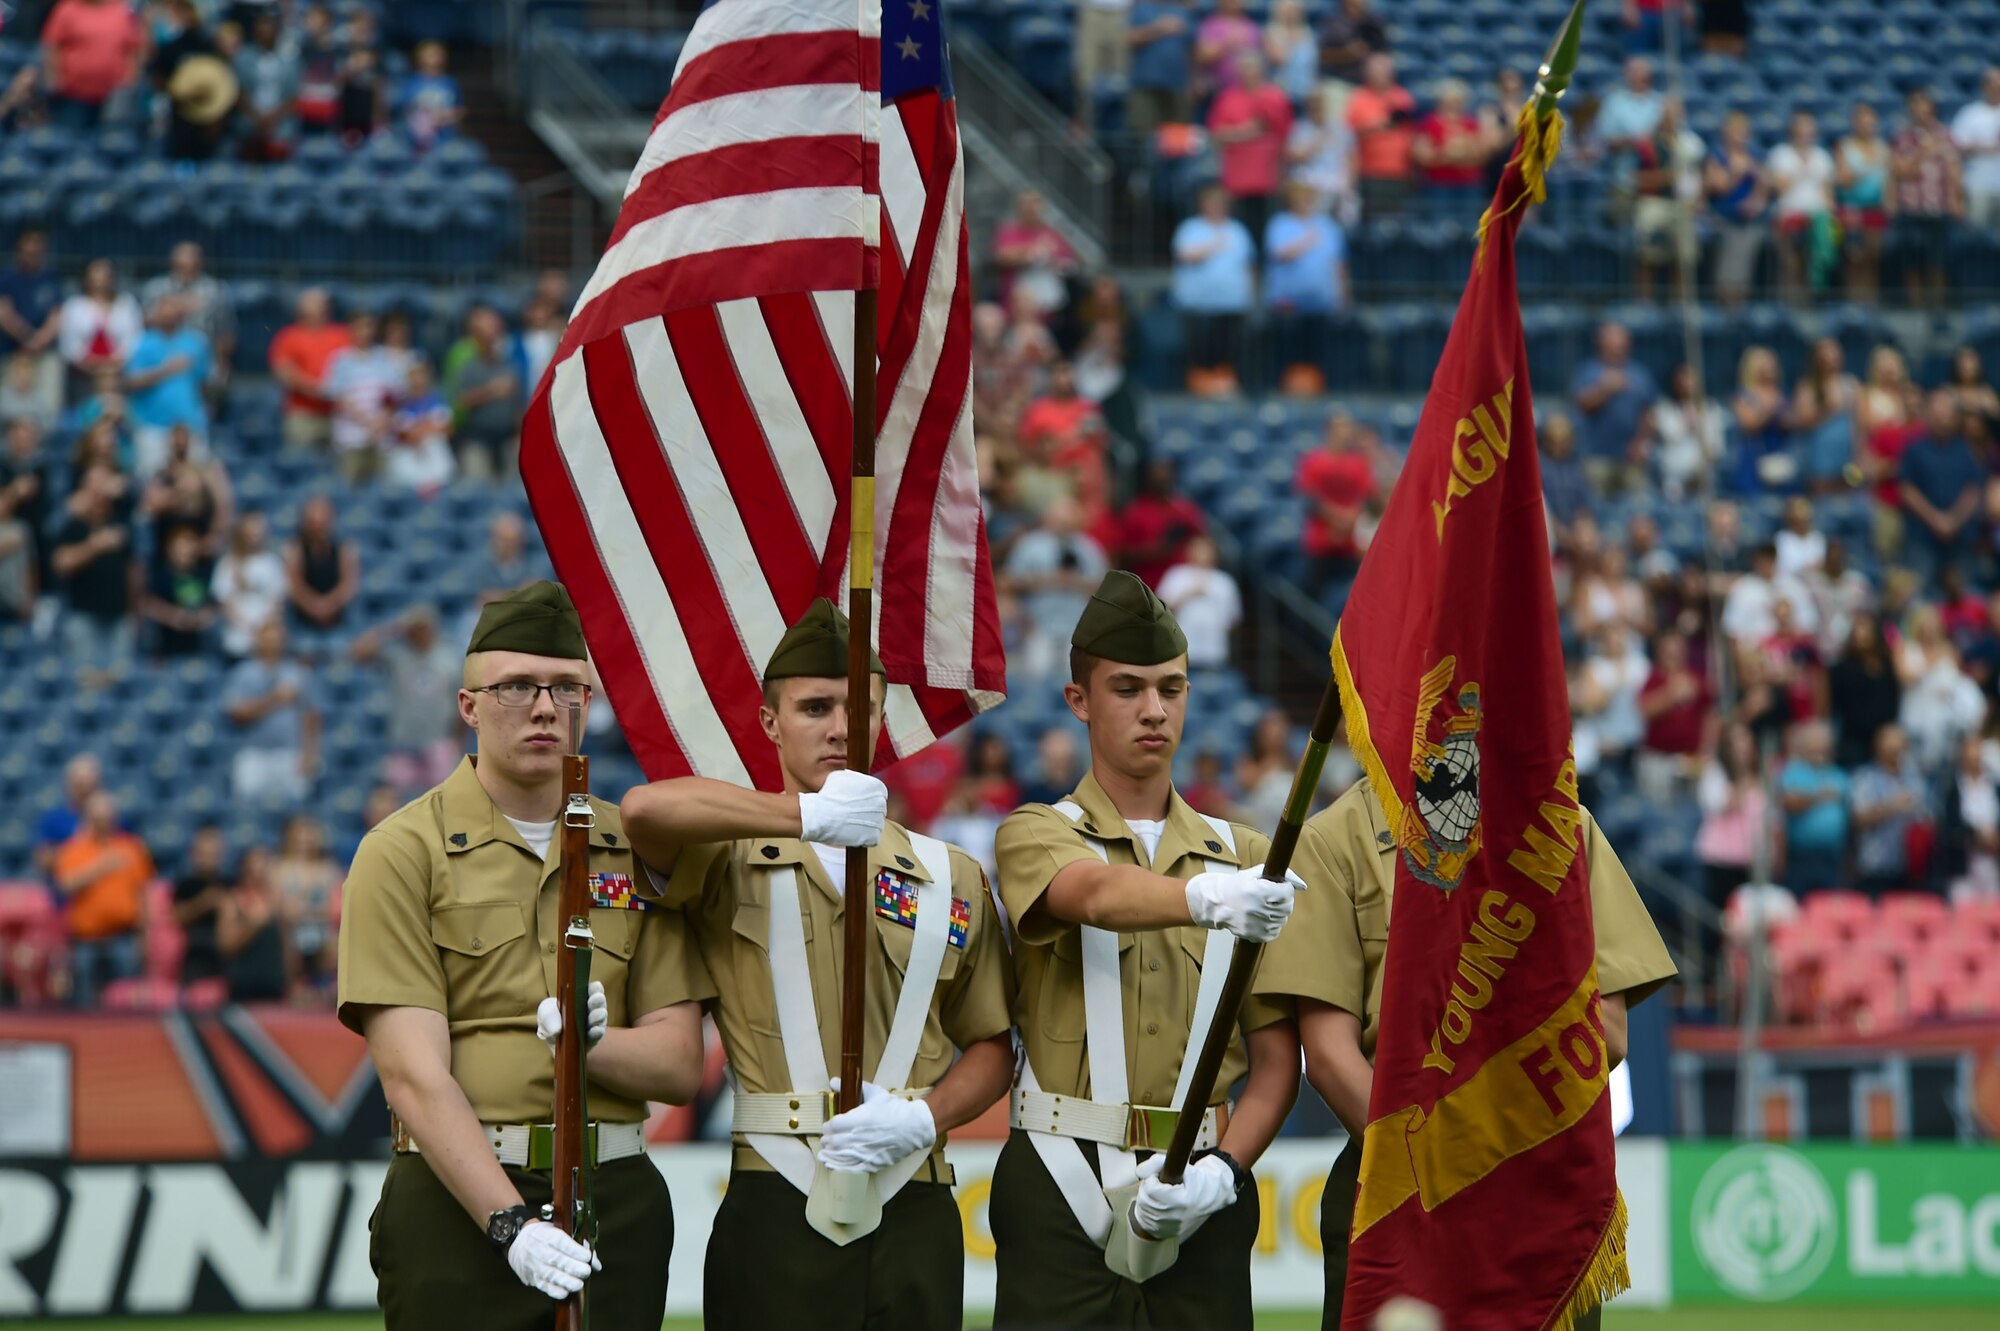 Reserve Officer Training Corps members bear the flag during the National Anthem July 4, 2015, at Sports Authority Field at Mile High Stadium in Denver.  The Denver Outlaws hosted the Boston Cannons in a Major League Lacrosse game which honored military members on Independence Day. (U.S. Air Force photo by Airman 1st Class Luke W. Nowakowski/Released) 